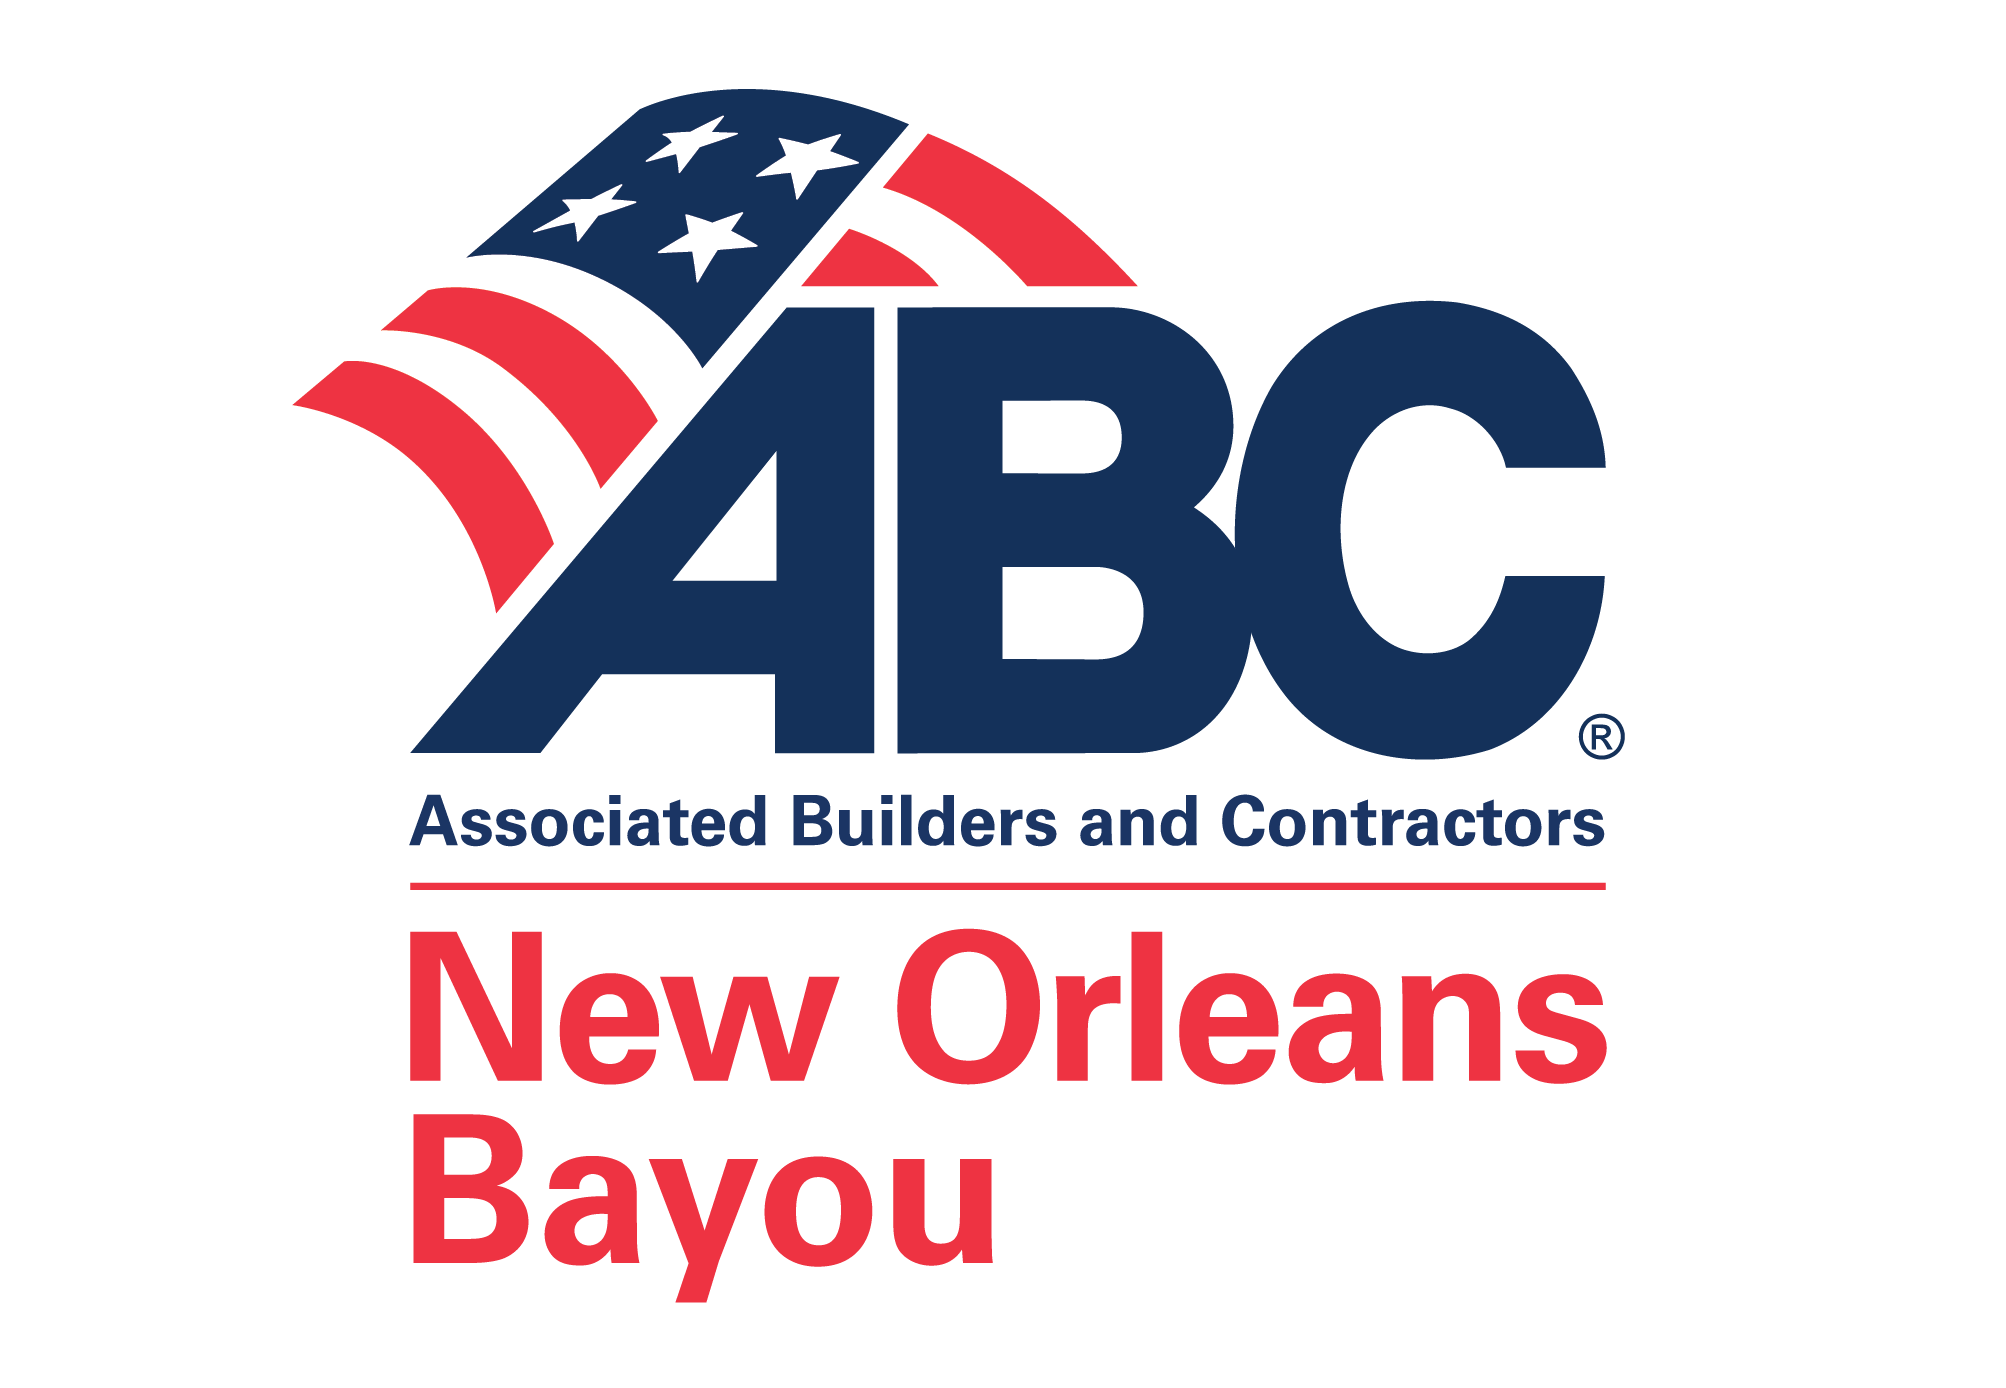 Associated Builders and Contractors New Orleans Bayou